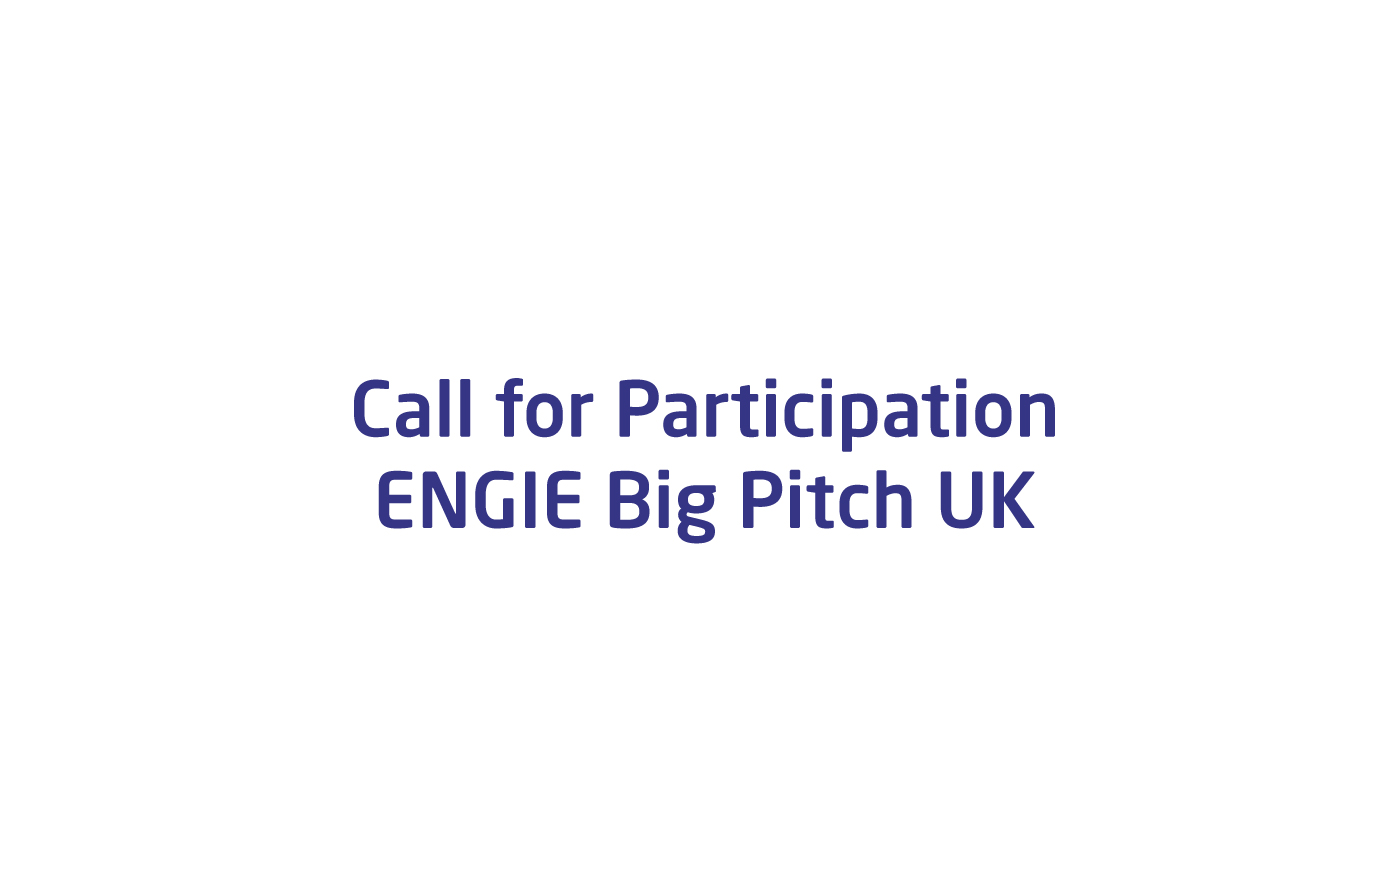 Call for Participation: ENGIE Big Pitch UK